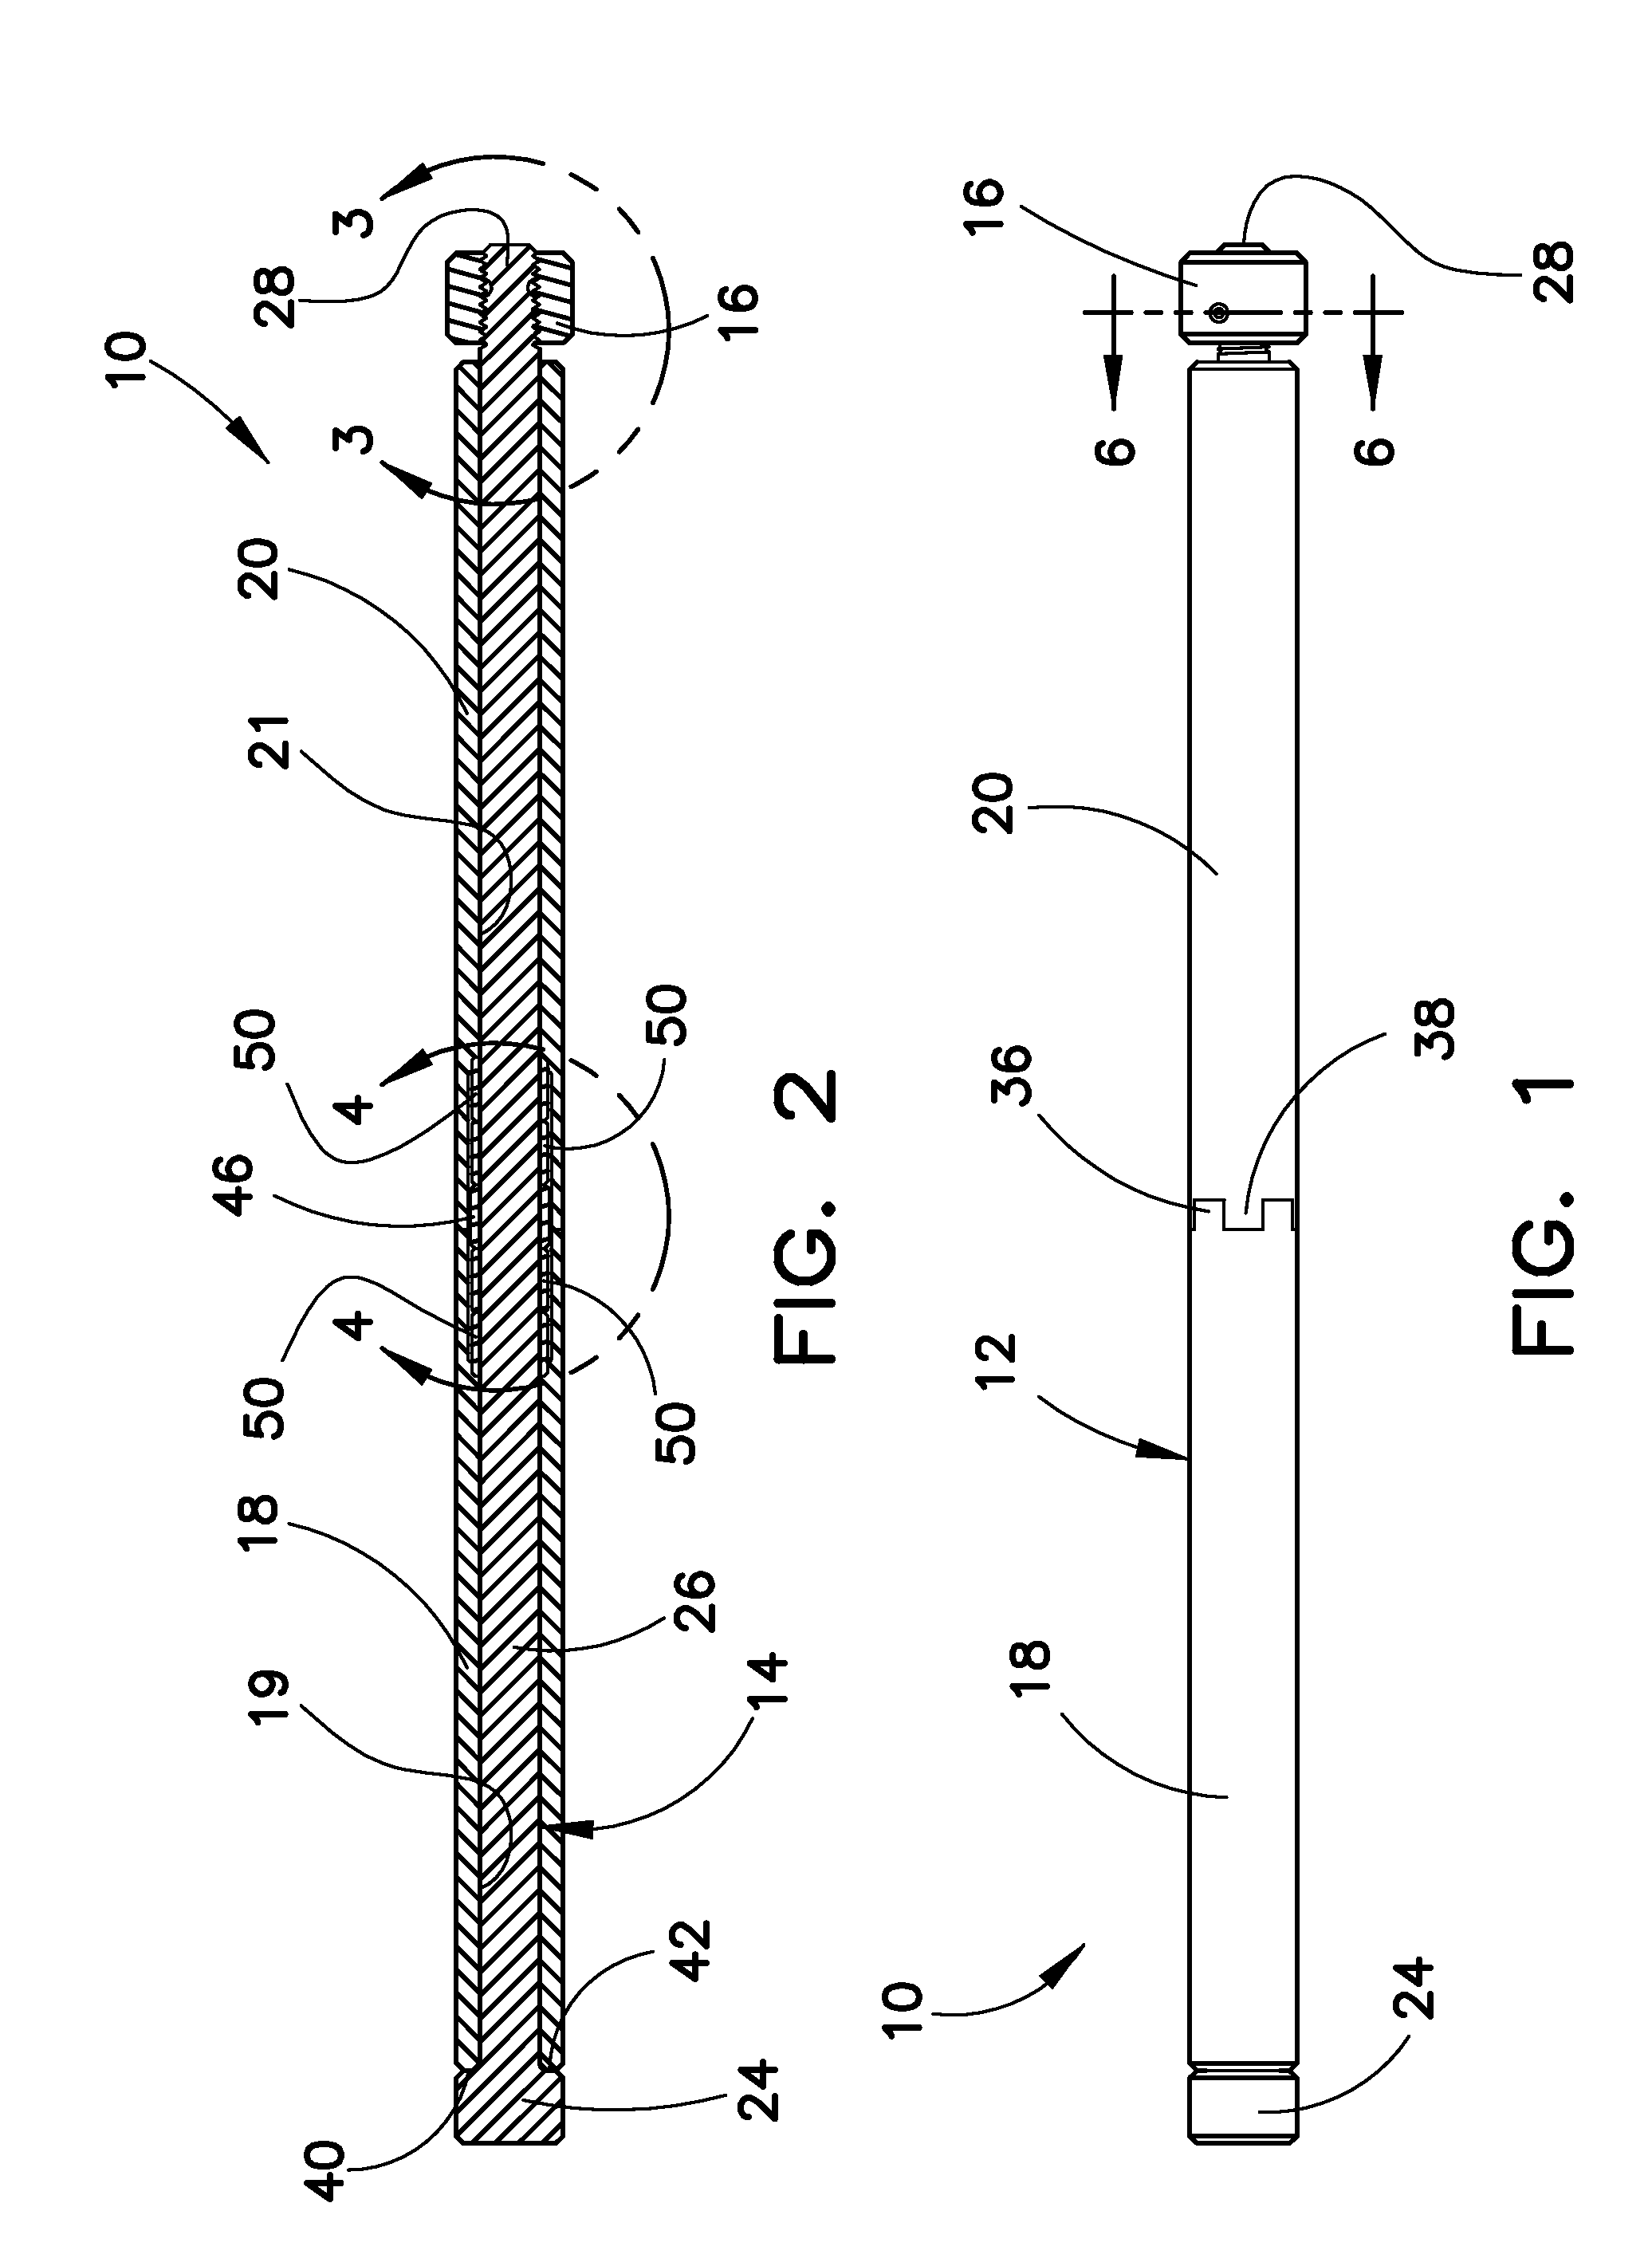 Resilient Spinal Rod System With Controllable Angulation